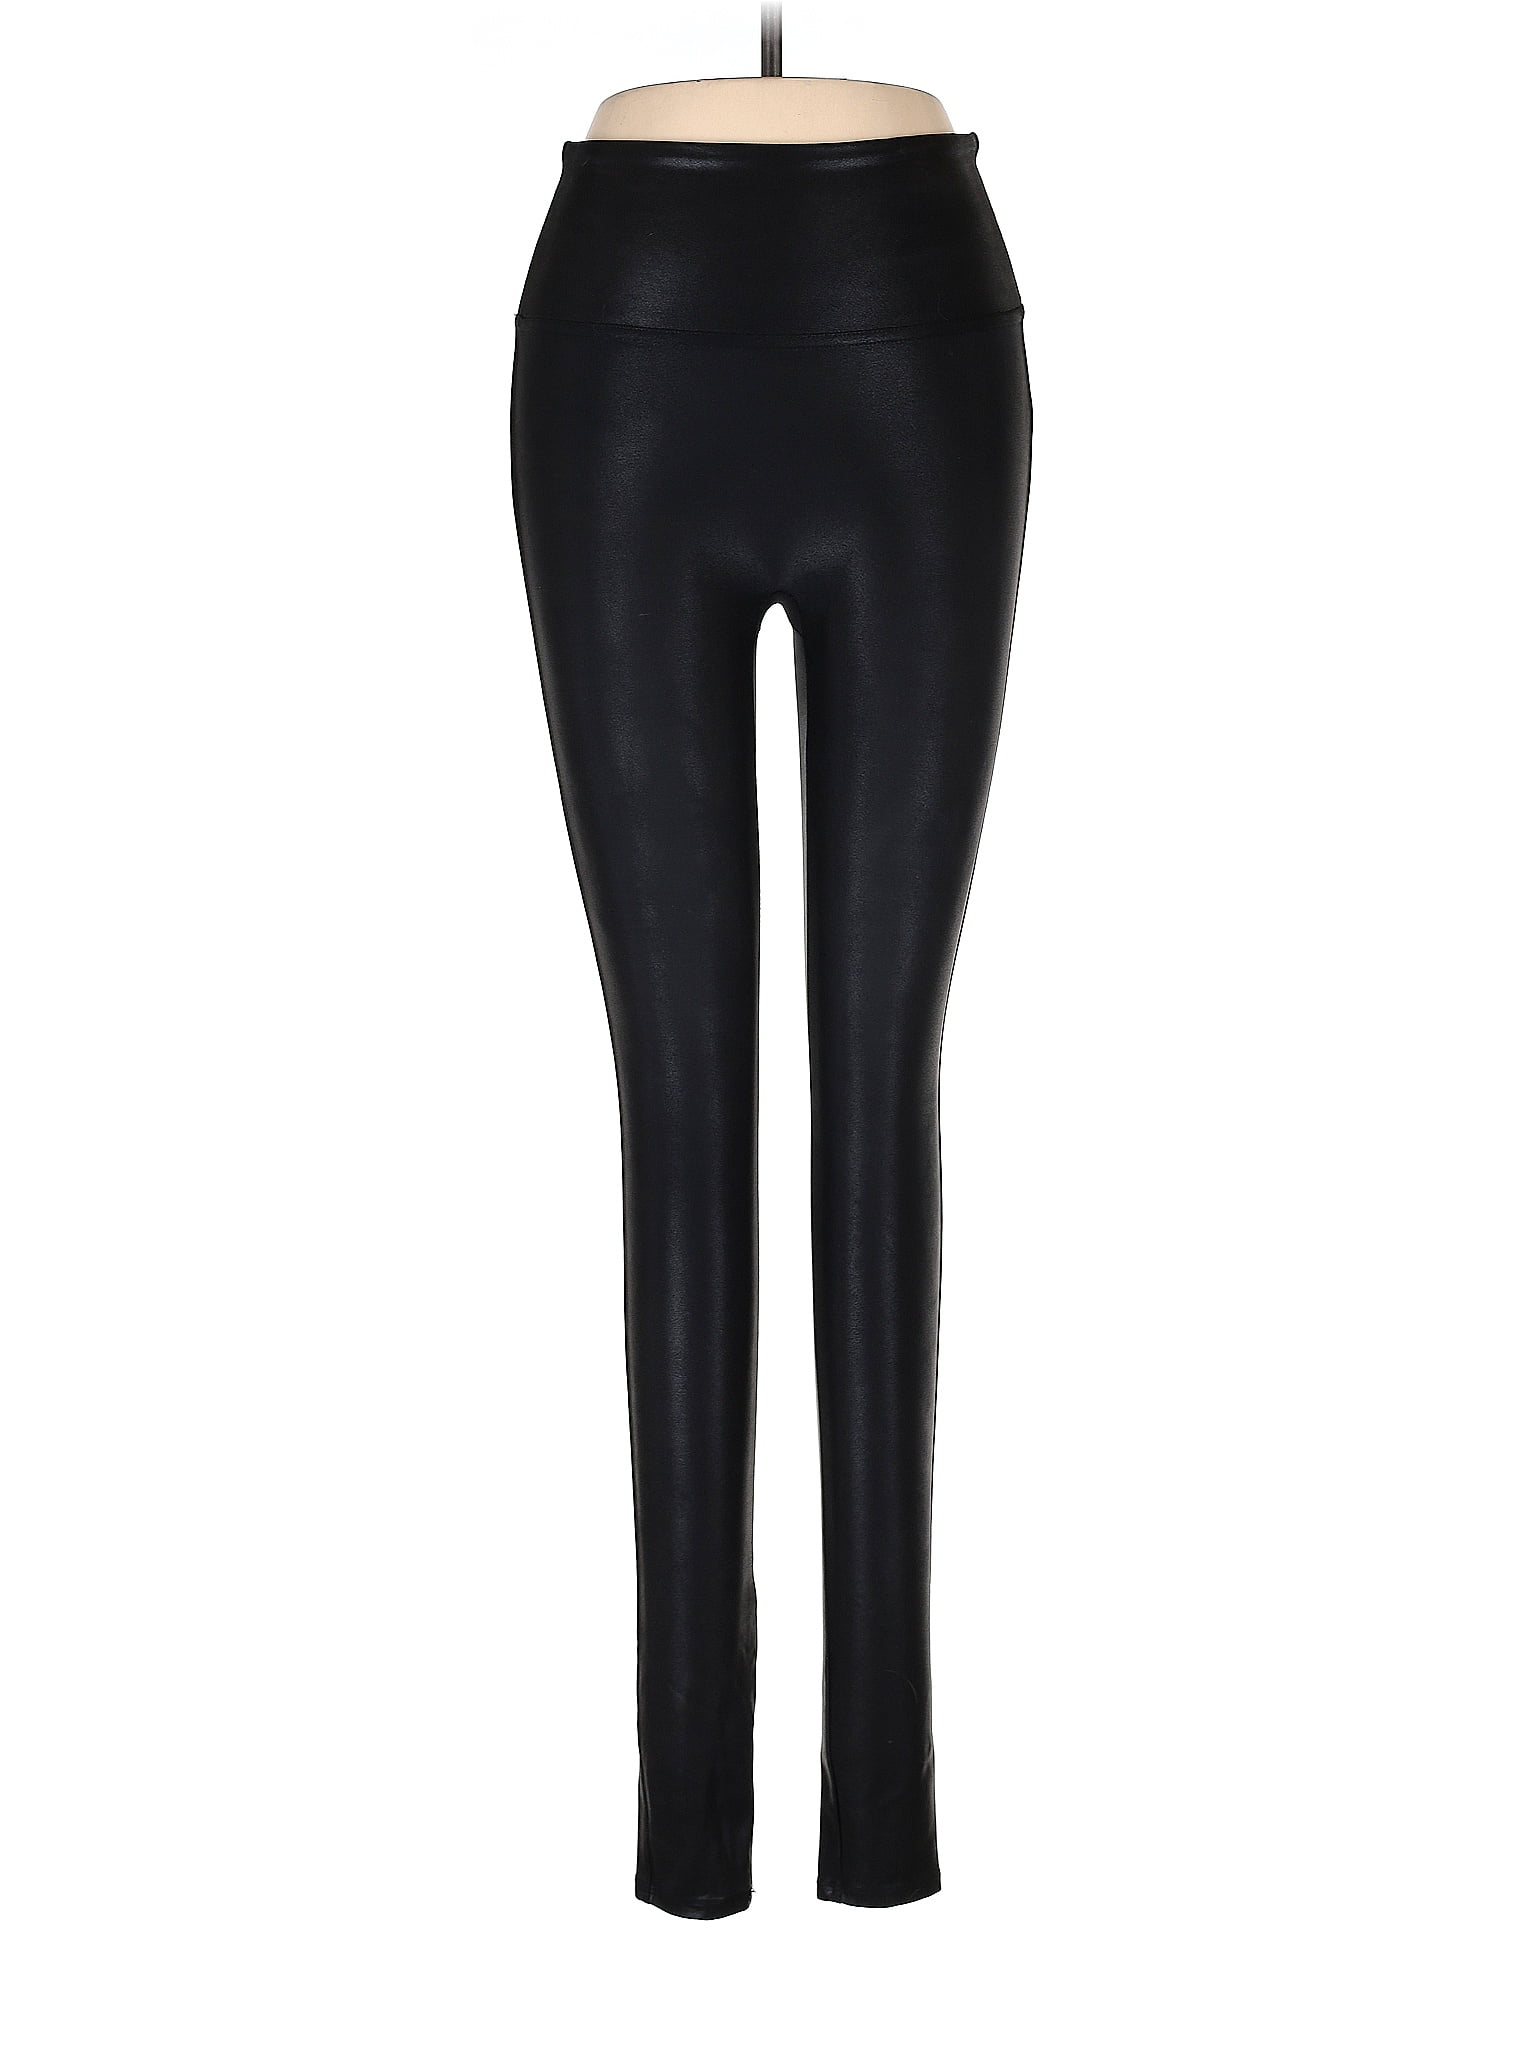 SPANX Solid Black Leggings Size S - 62% off